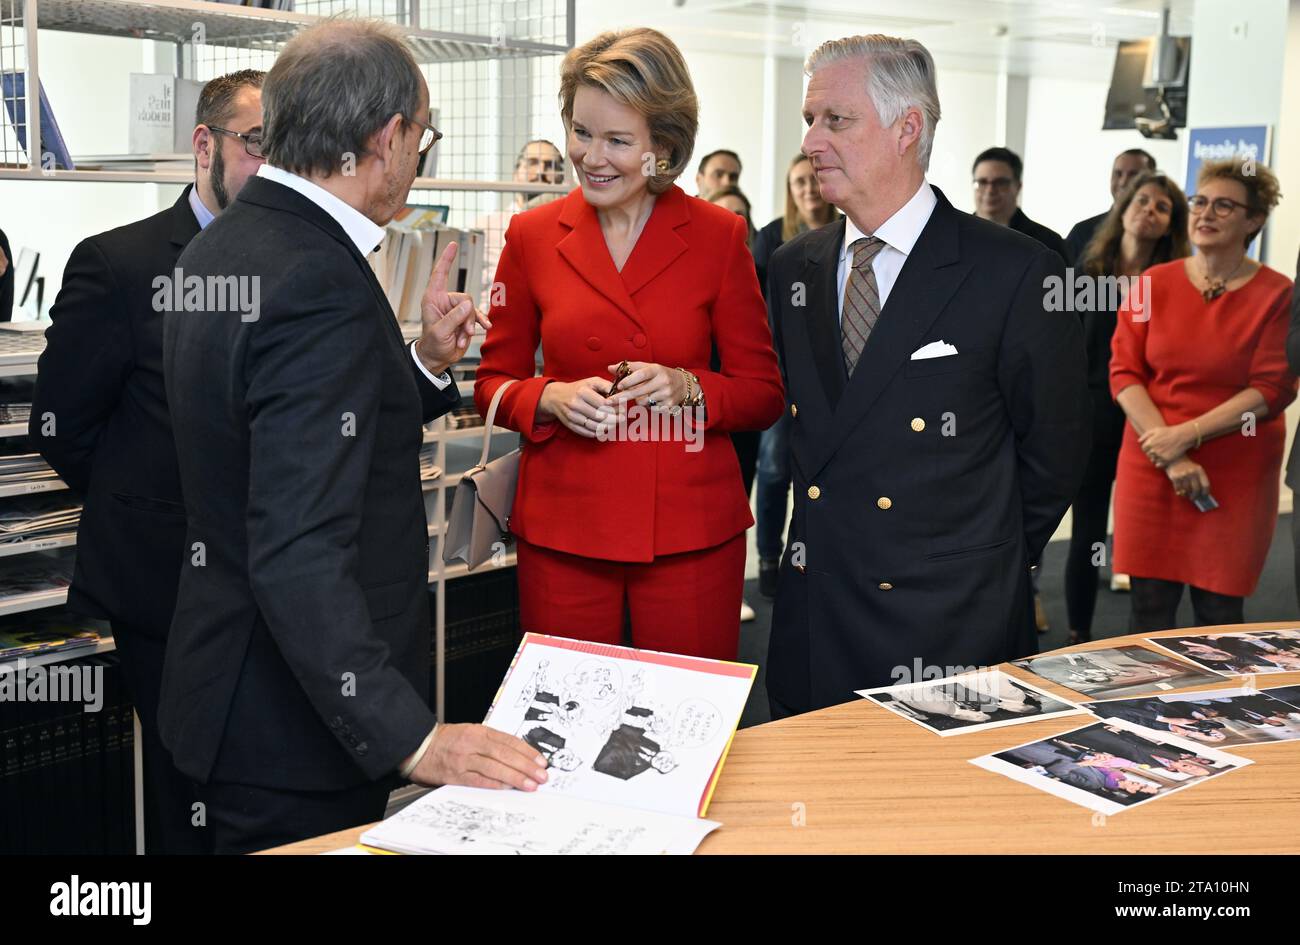 Cartoonist Pierre Kroll, Queen Mathilde of Belgium and King Philippe - Filip of Belgium pictured during a royal visit to the editorial floor of the newspaper Le Soir, in Brussels, Tuesday 28 November 2023. The royal couple will discover the technological and substantive innovations implemented within the editorial process, in particular the initiatives taken in terms of the digitalization of information, the transversal organization of editorial work, collaborative and investigative journalism. They meet the management and journalists of Le Soir throughout their visit. BELGA PHOTO ERIC LALMAN  Stock Photo